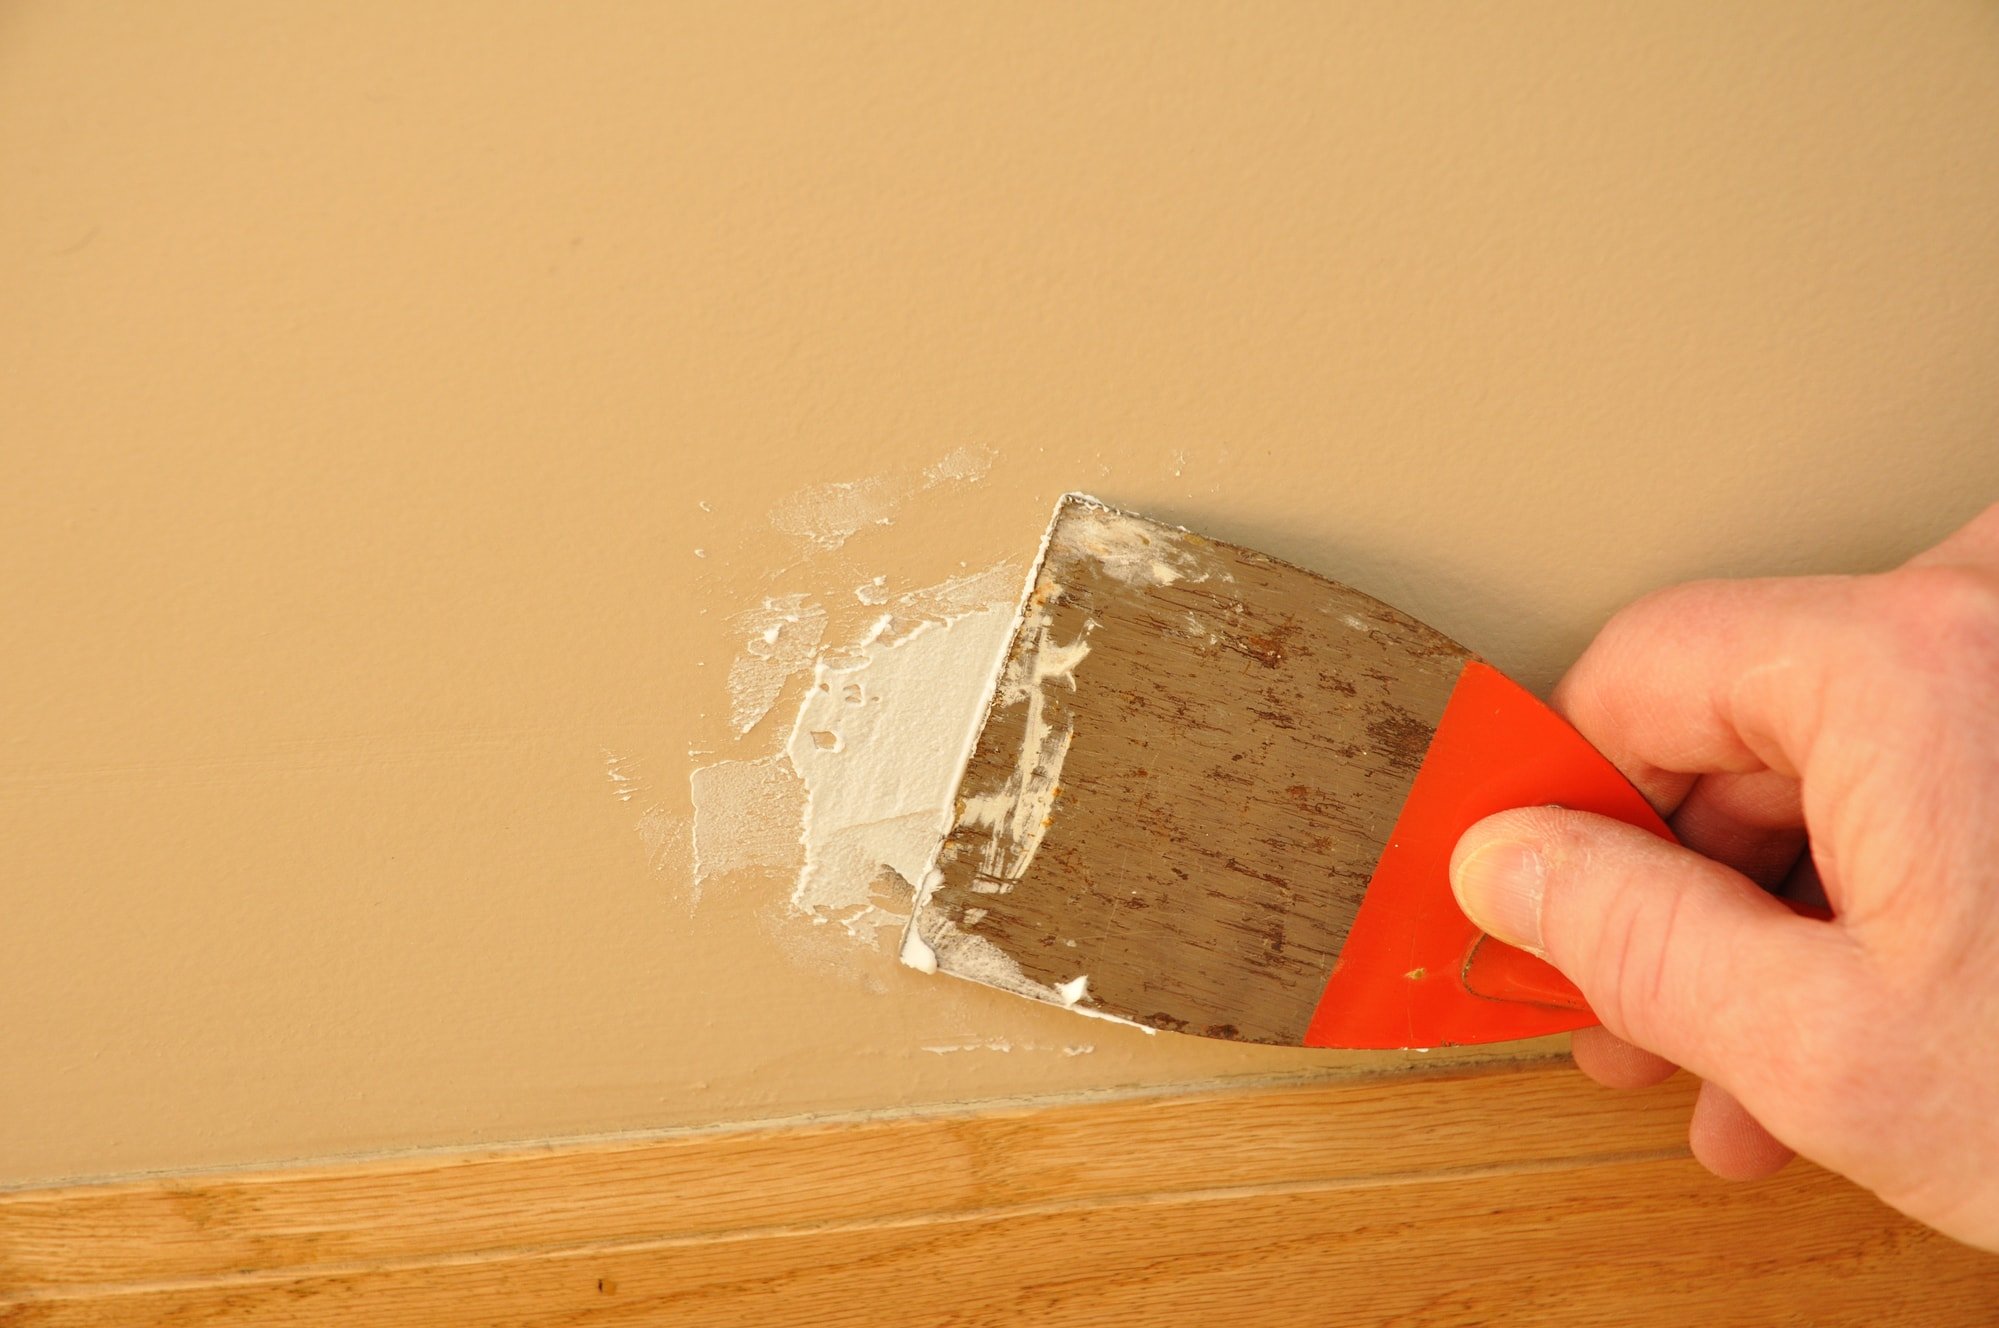 Putty Knife with Spackling Paste to Repair Wall Damage